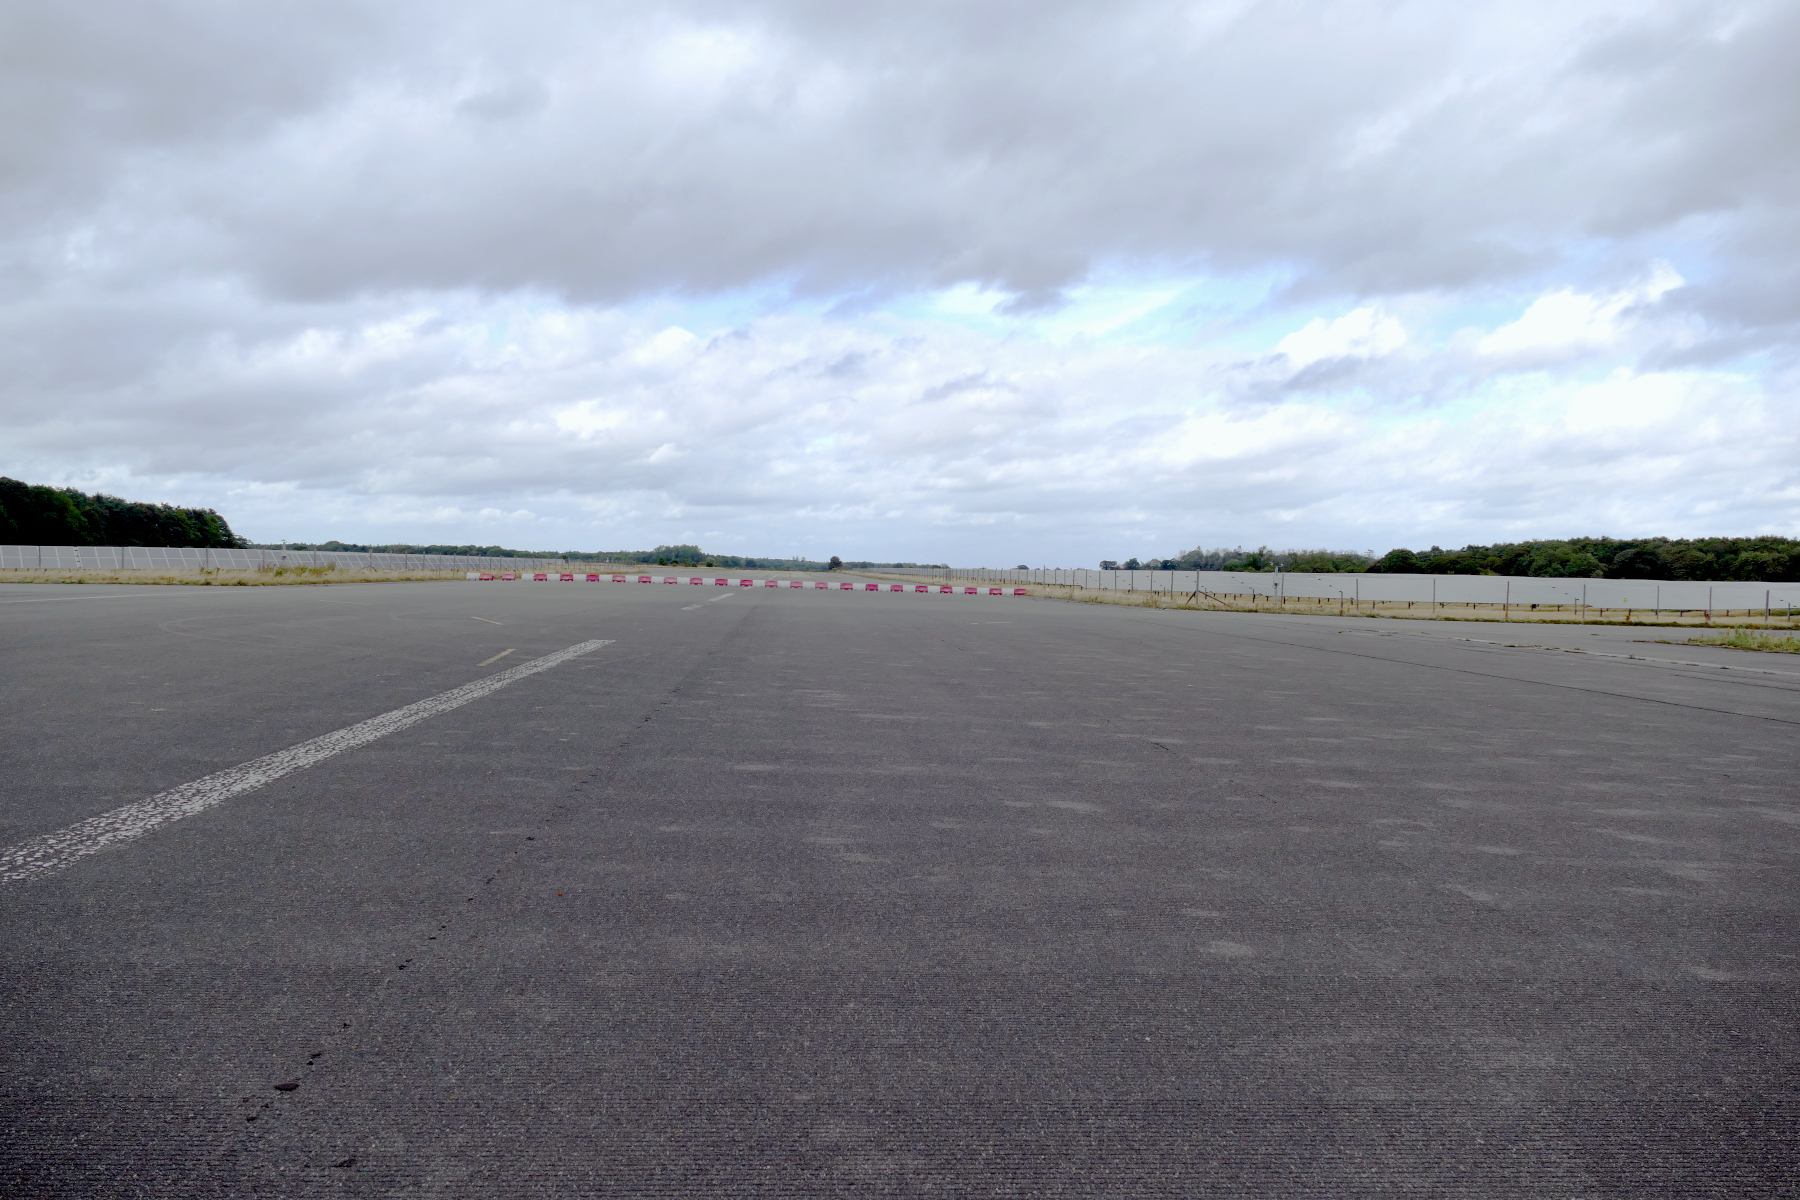 Wide shot of old RAF aircraft concrete runway